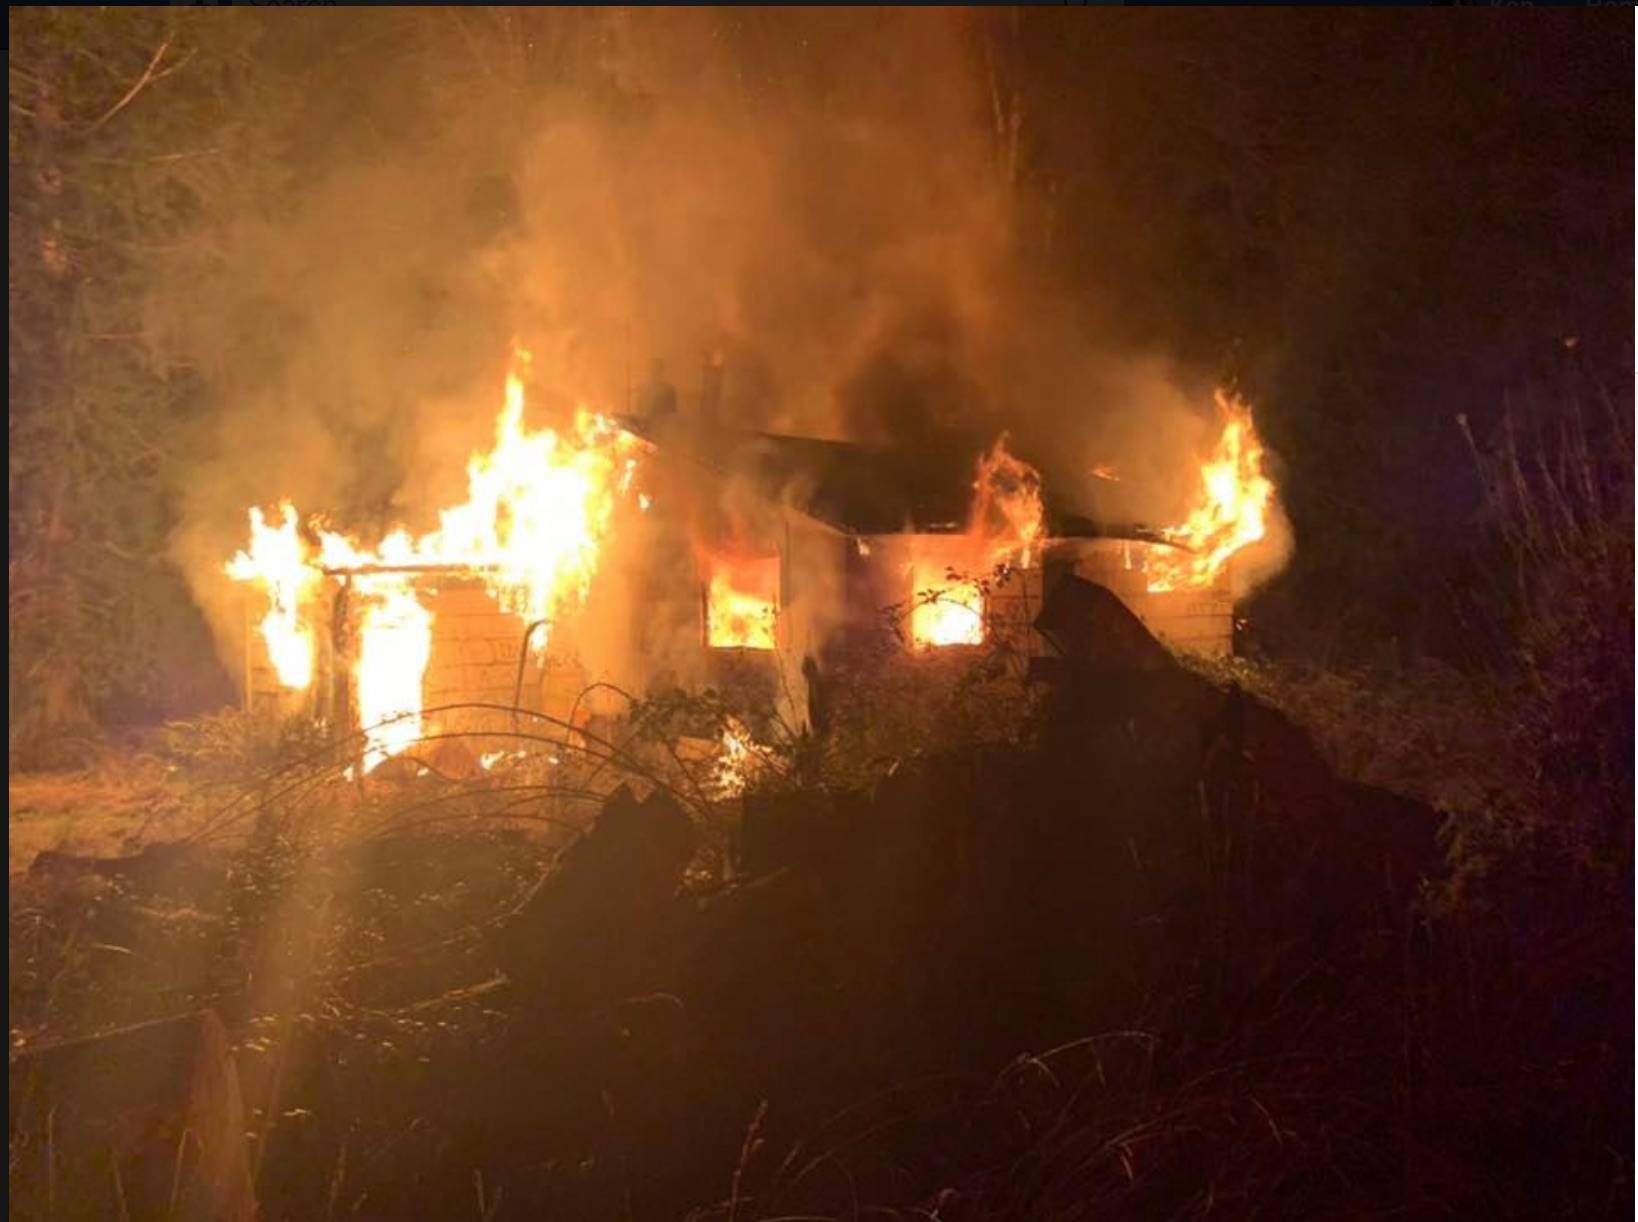 An abandoned home along Viking Way was fully engulfed in flames on Christmas Eve. (photo courtesy of Poulsbo Fire)